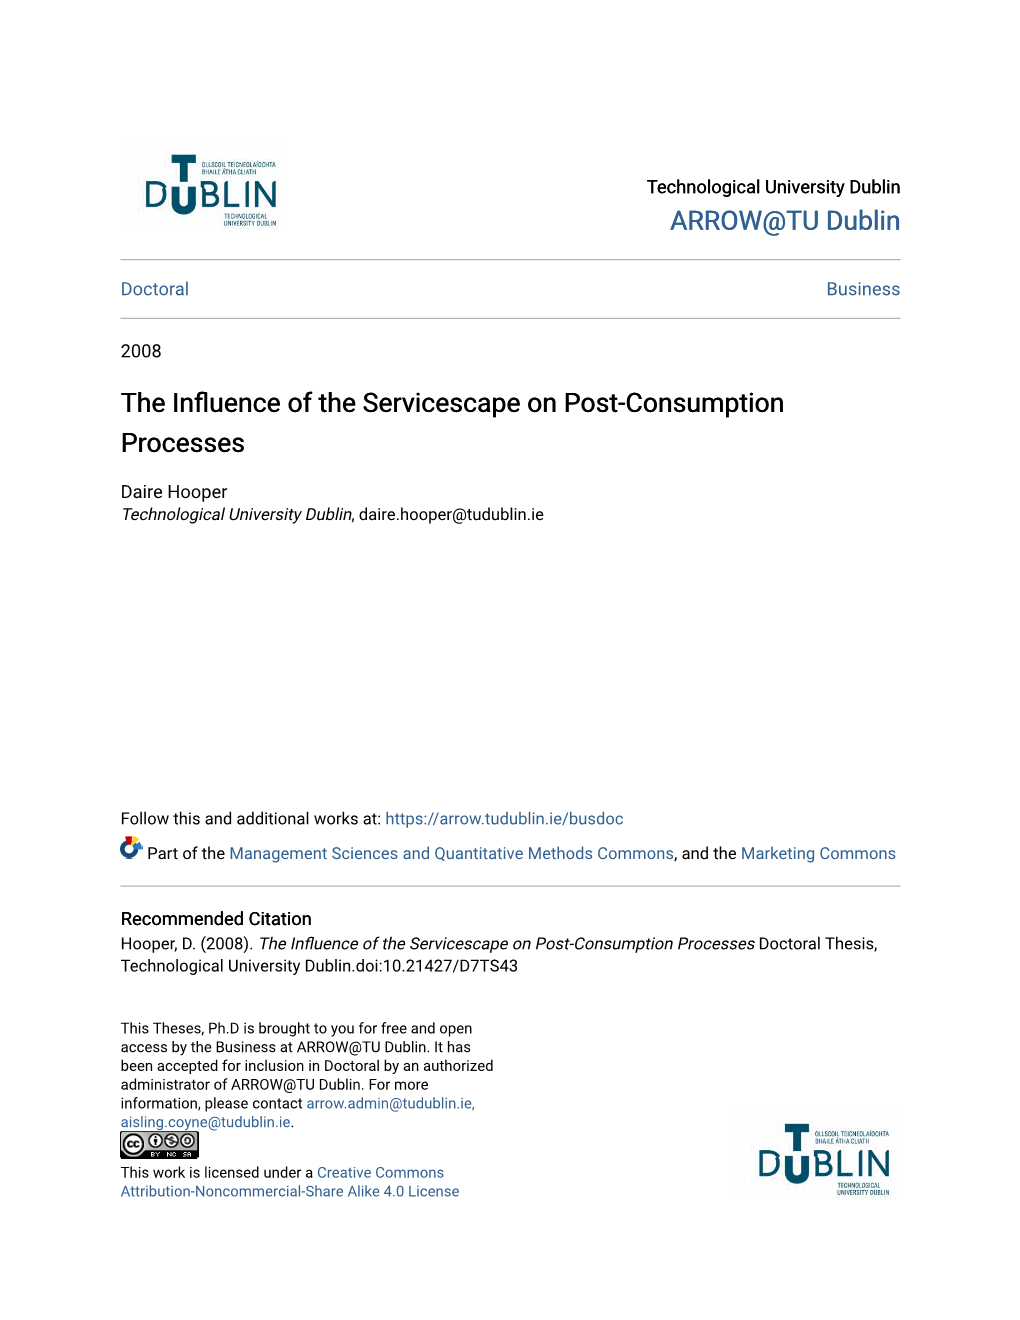 The Influence of the Servicescape on Post-Consumption Processes